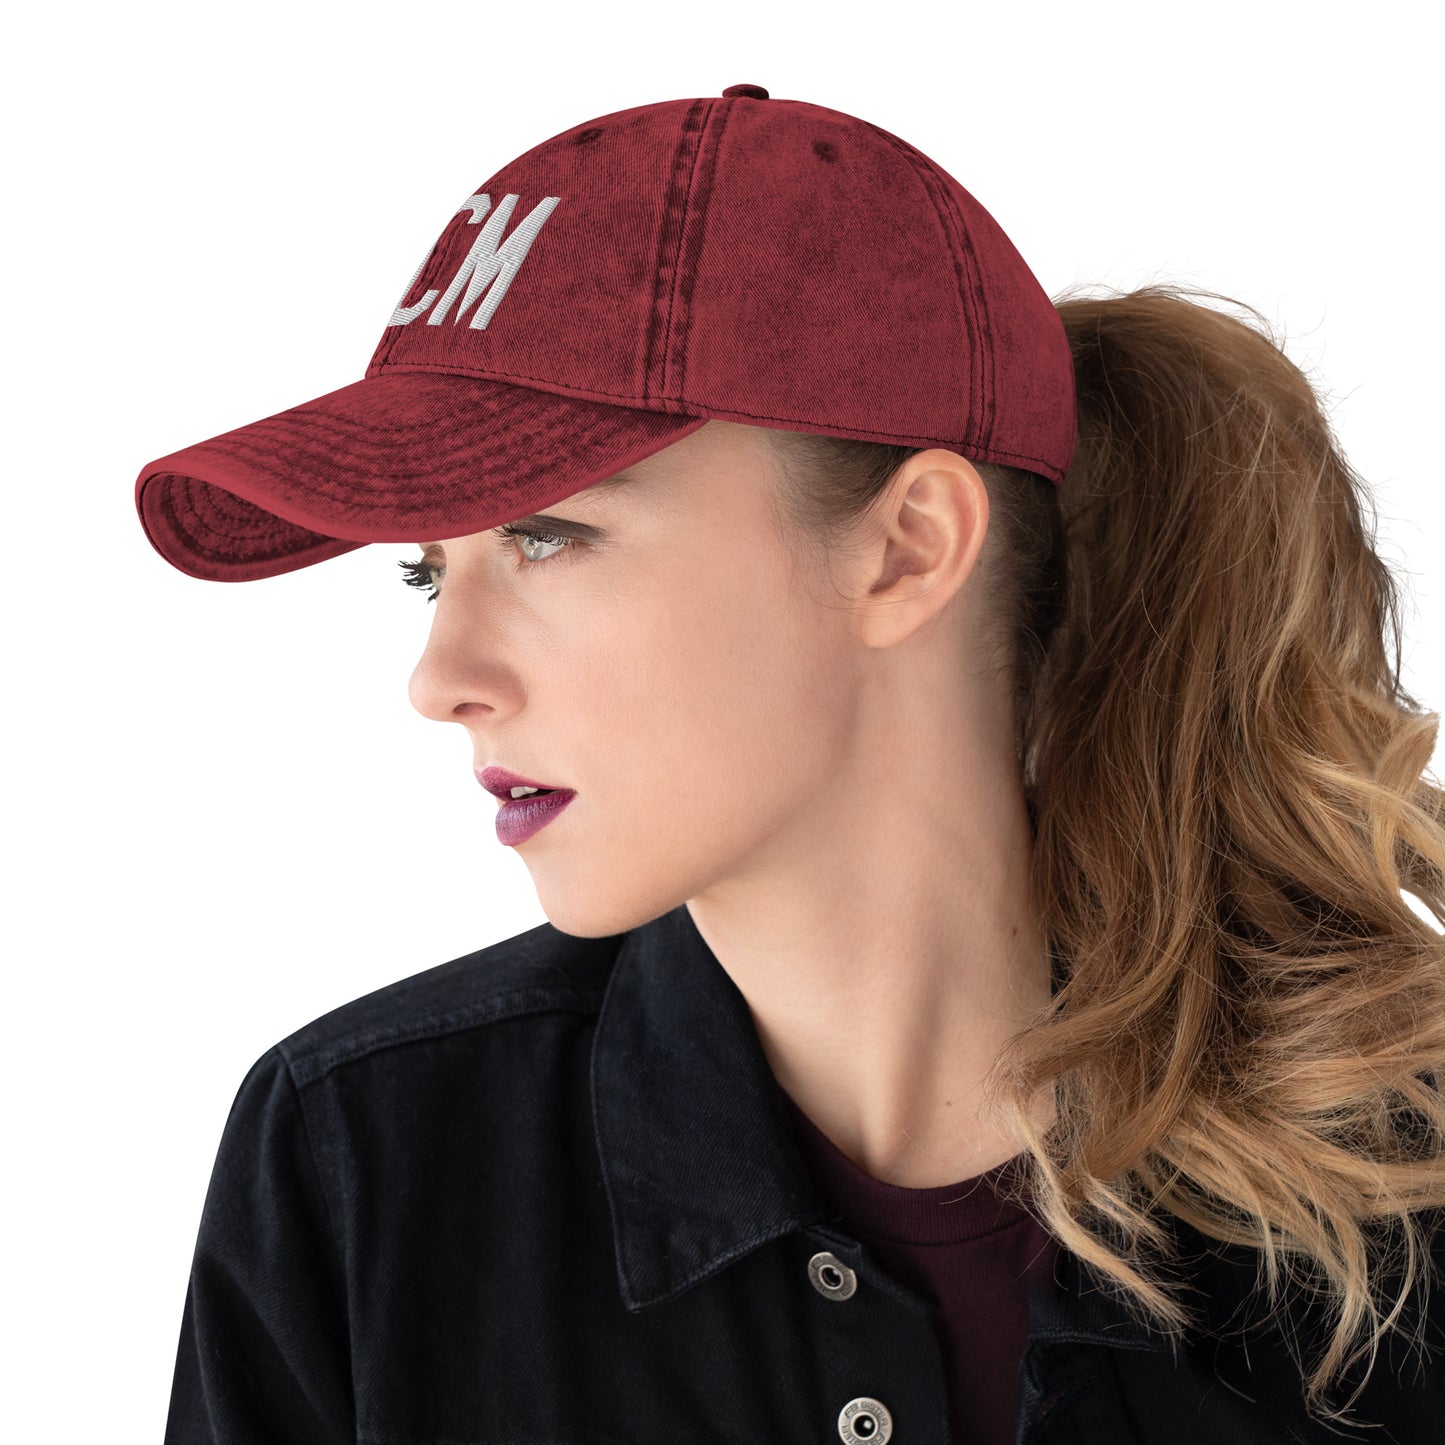 Airport Code Twill Cap - White • YCM St. Catharines • YHM Designs - Image 06